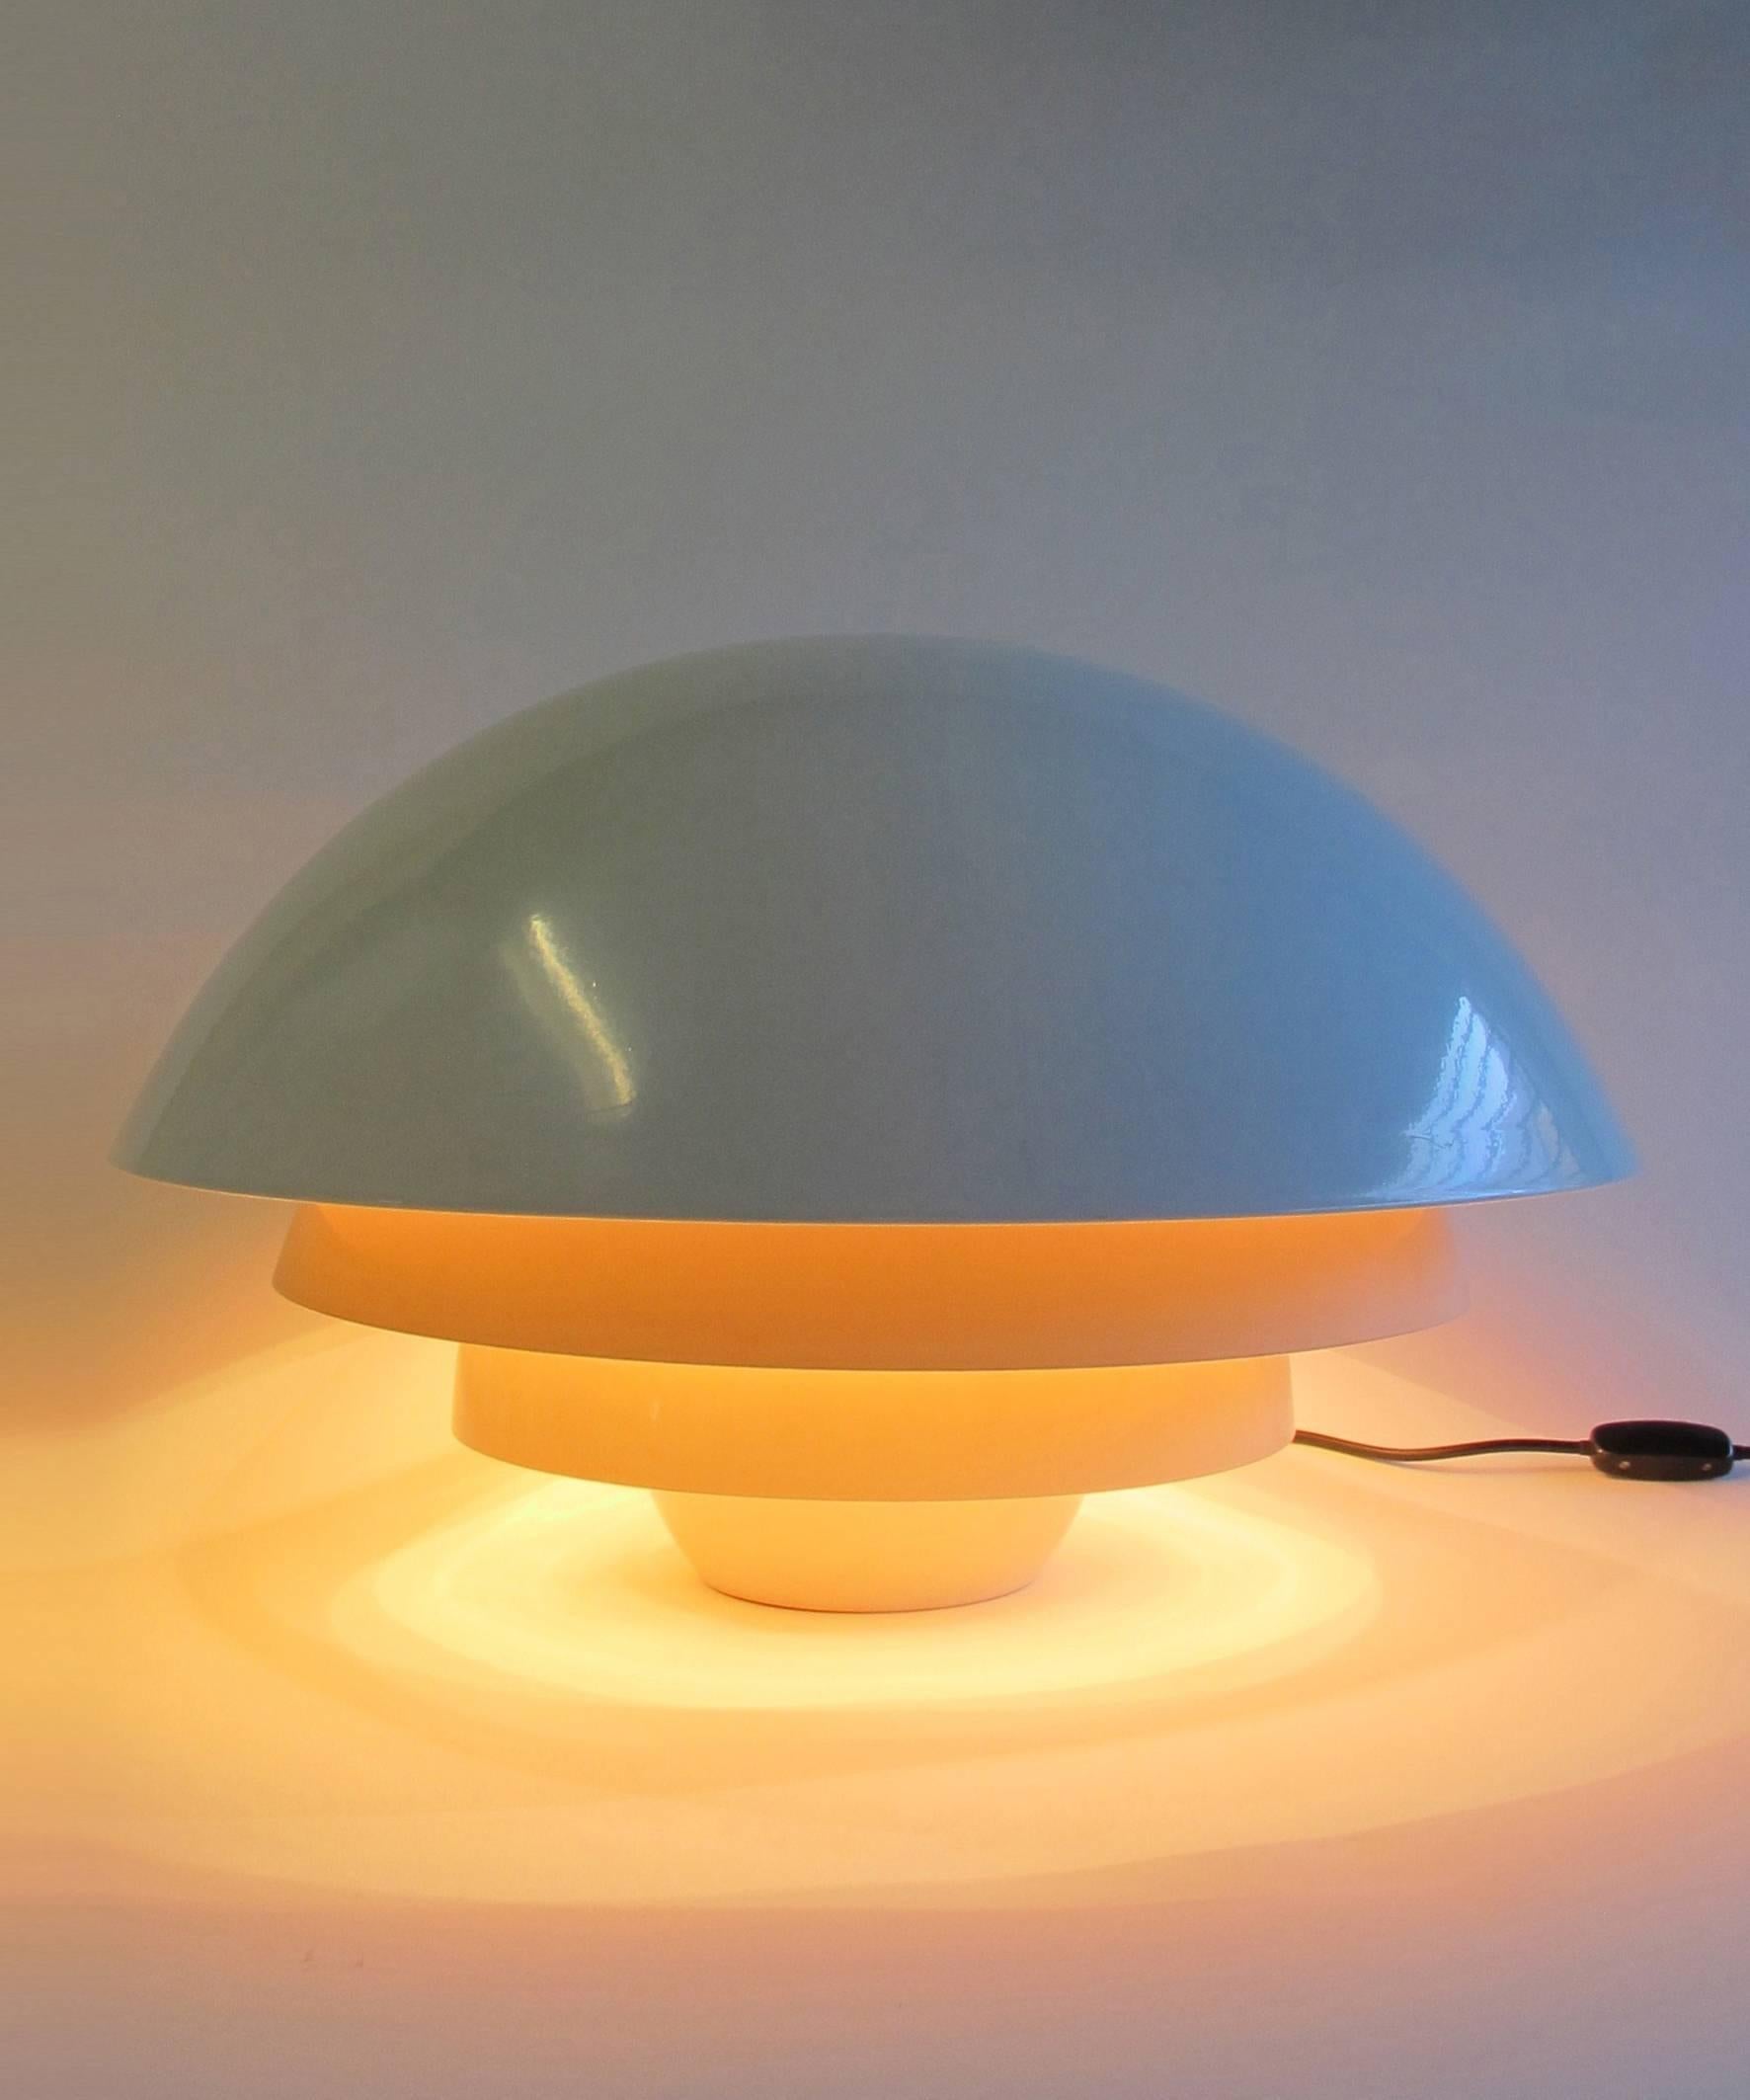 A true design icon! 

Gorgeous table lamp called 'Visiere' designed by Sergio Asti for Martinelli Luce. The number of the model is 642. At the bottom of the lamp the name of the artist, manufacturer, the model and name of the lamp can be read. The